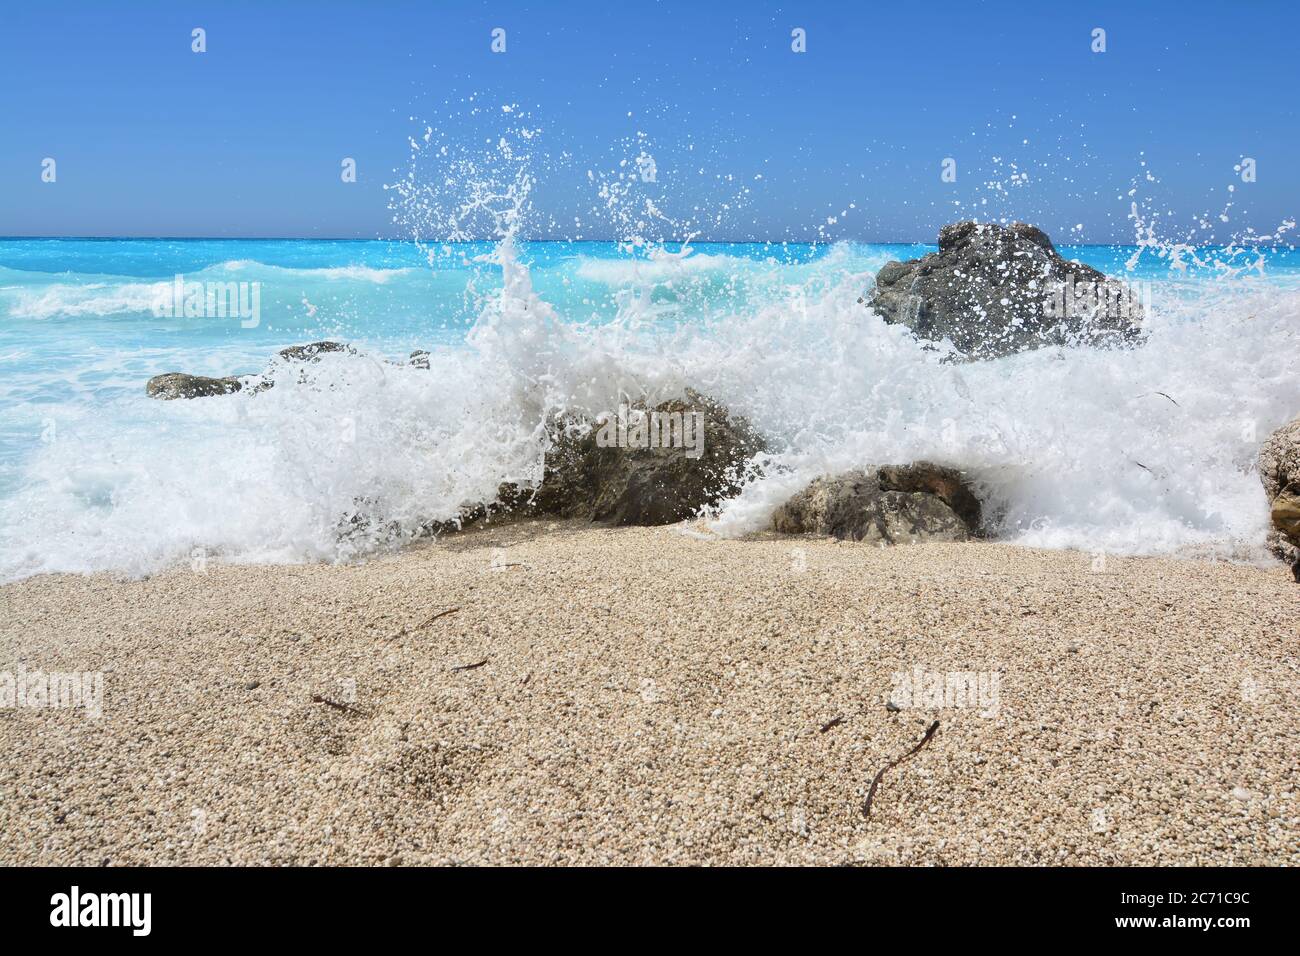 White splash over rocks and pebbles, the last game of the waves before the sea calms down after the storm, Kathisma beach, Lefkada, Greece Stock Photo